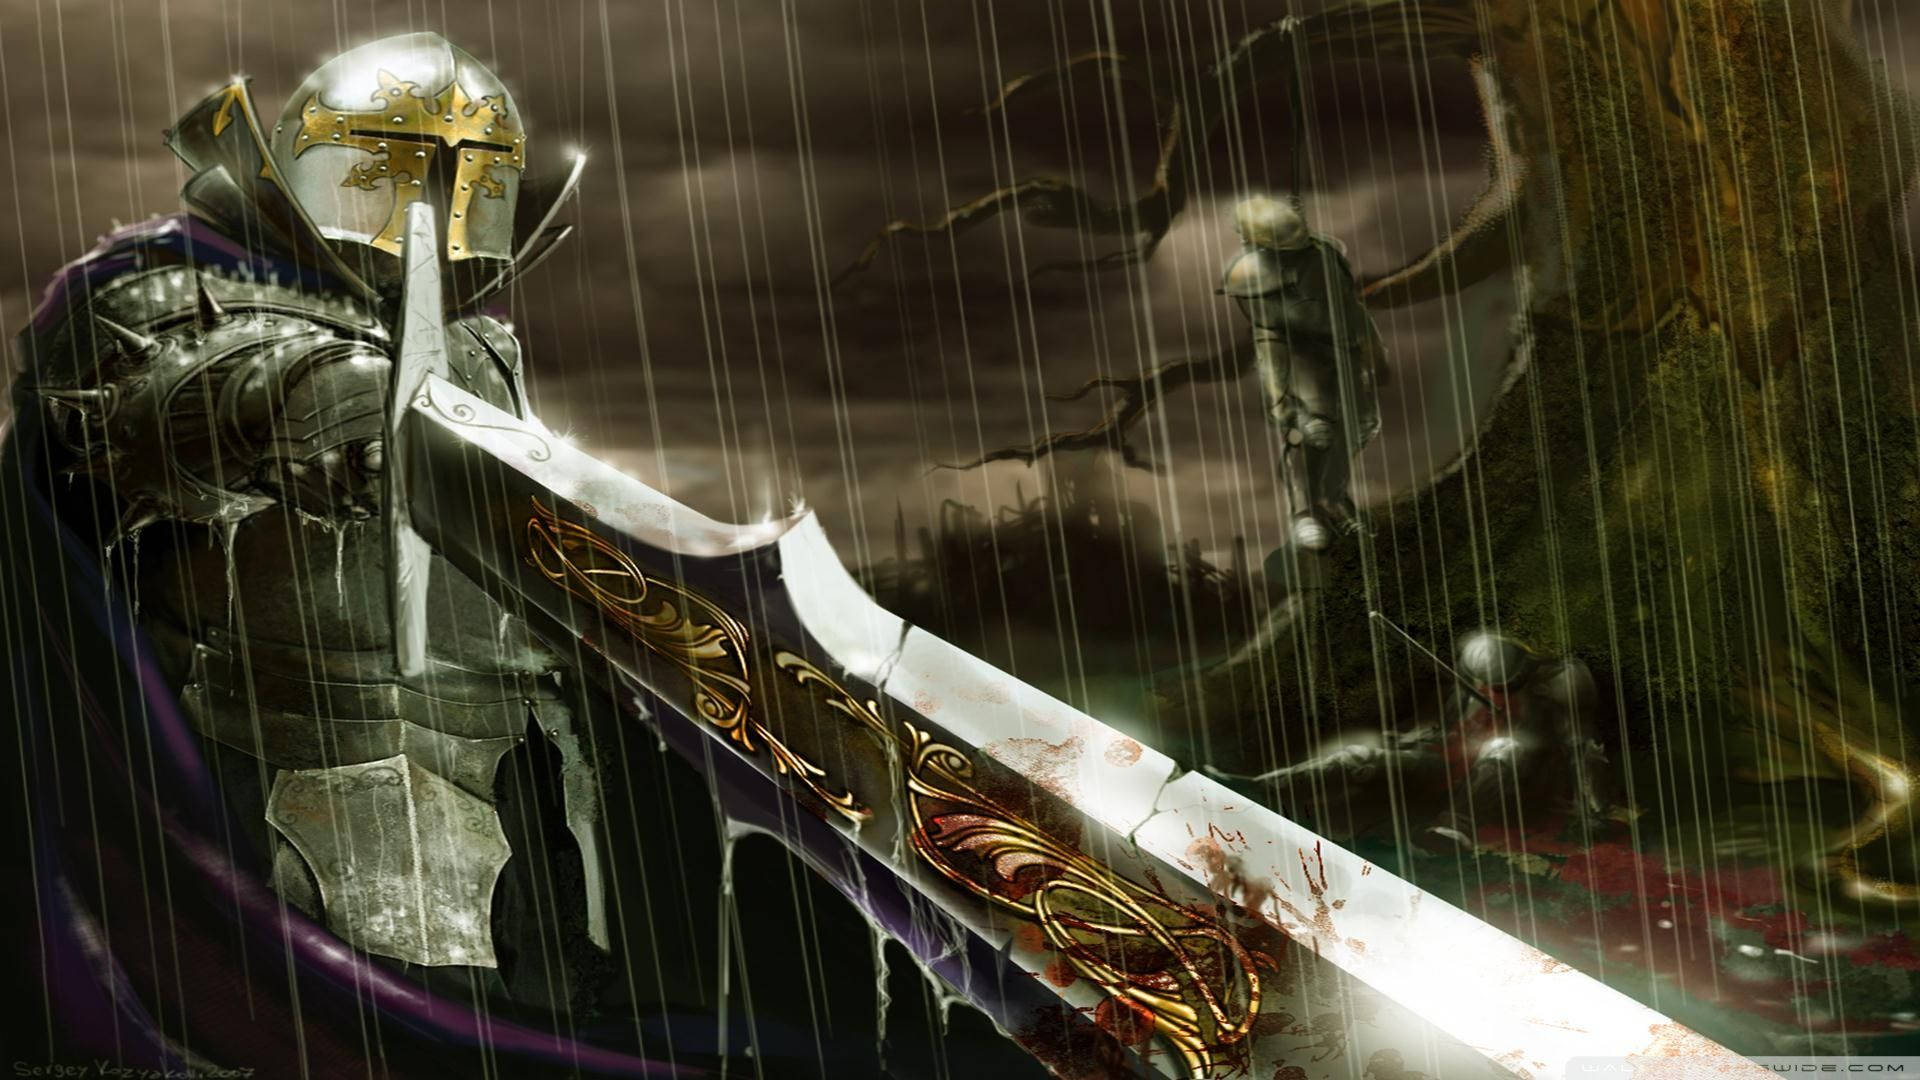 Brave knight holds sword in hand, standing before a stormy sky. Wallpaper